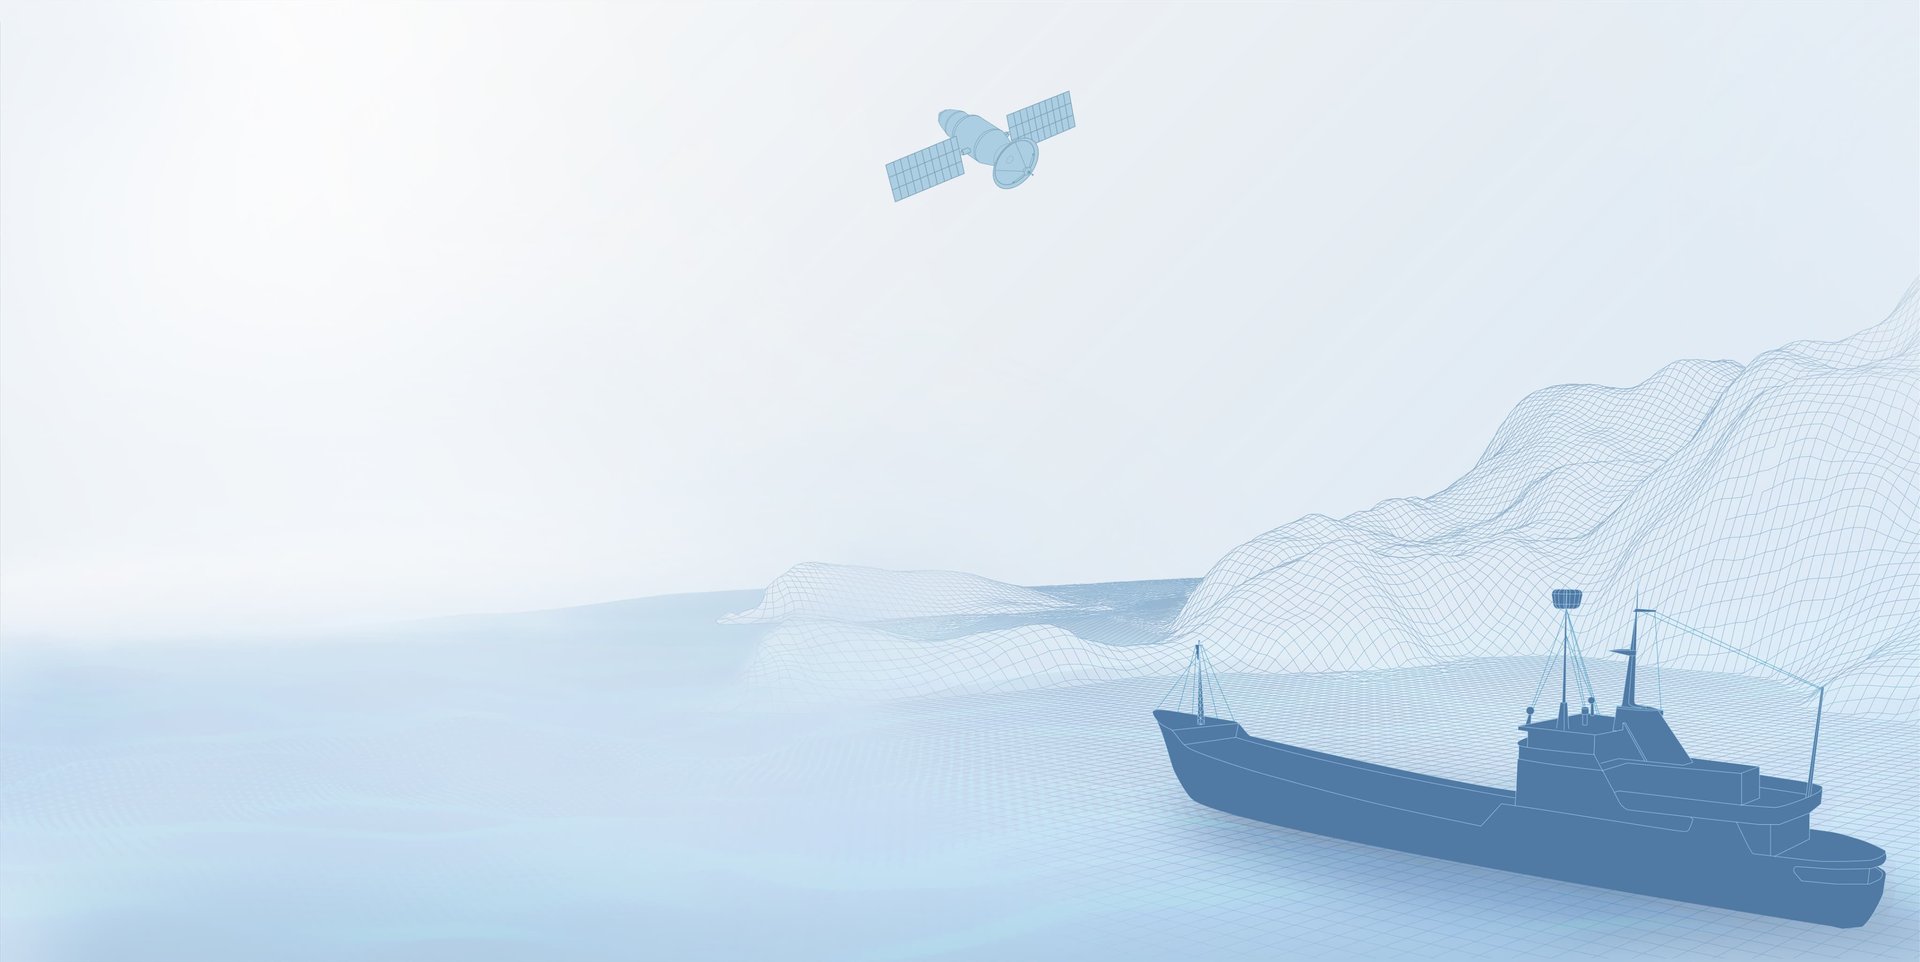 Illustration of a ship on a stylized blue ocean with digital grid lines rising to form mountain shapes in the background. Above in the sky, there is a small plane depicted to the upper left side. The image fades to white towards the top and has a transparent background.